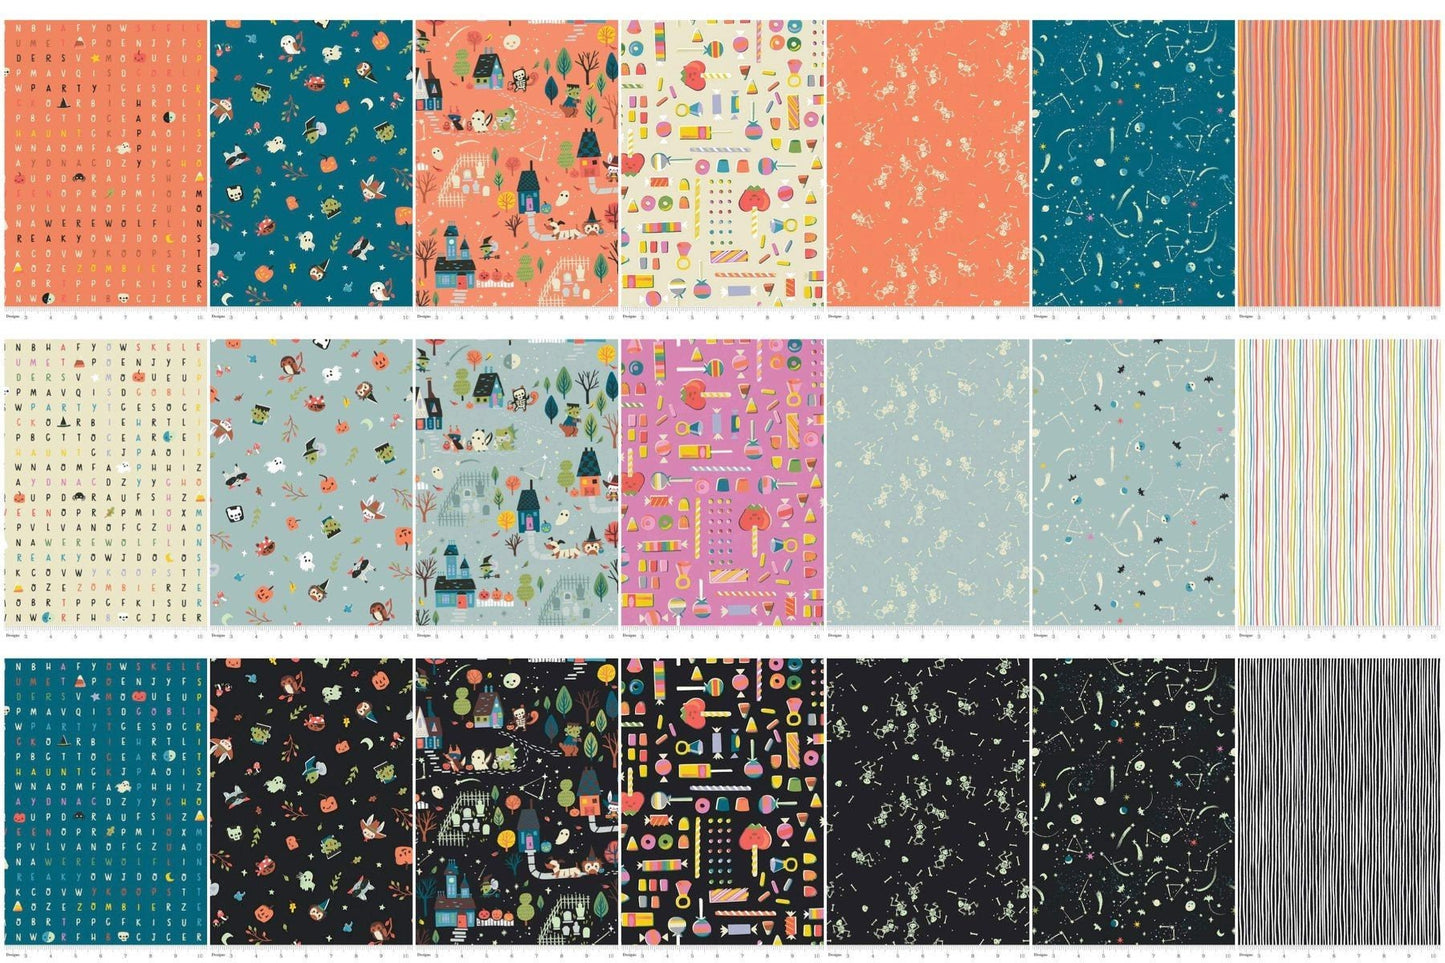 Tiny Treaters by Jill Howarth Fat Quarter Bundle of 21 Pieces FQ-10480-21 Cotton Woven Fabric